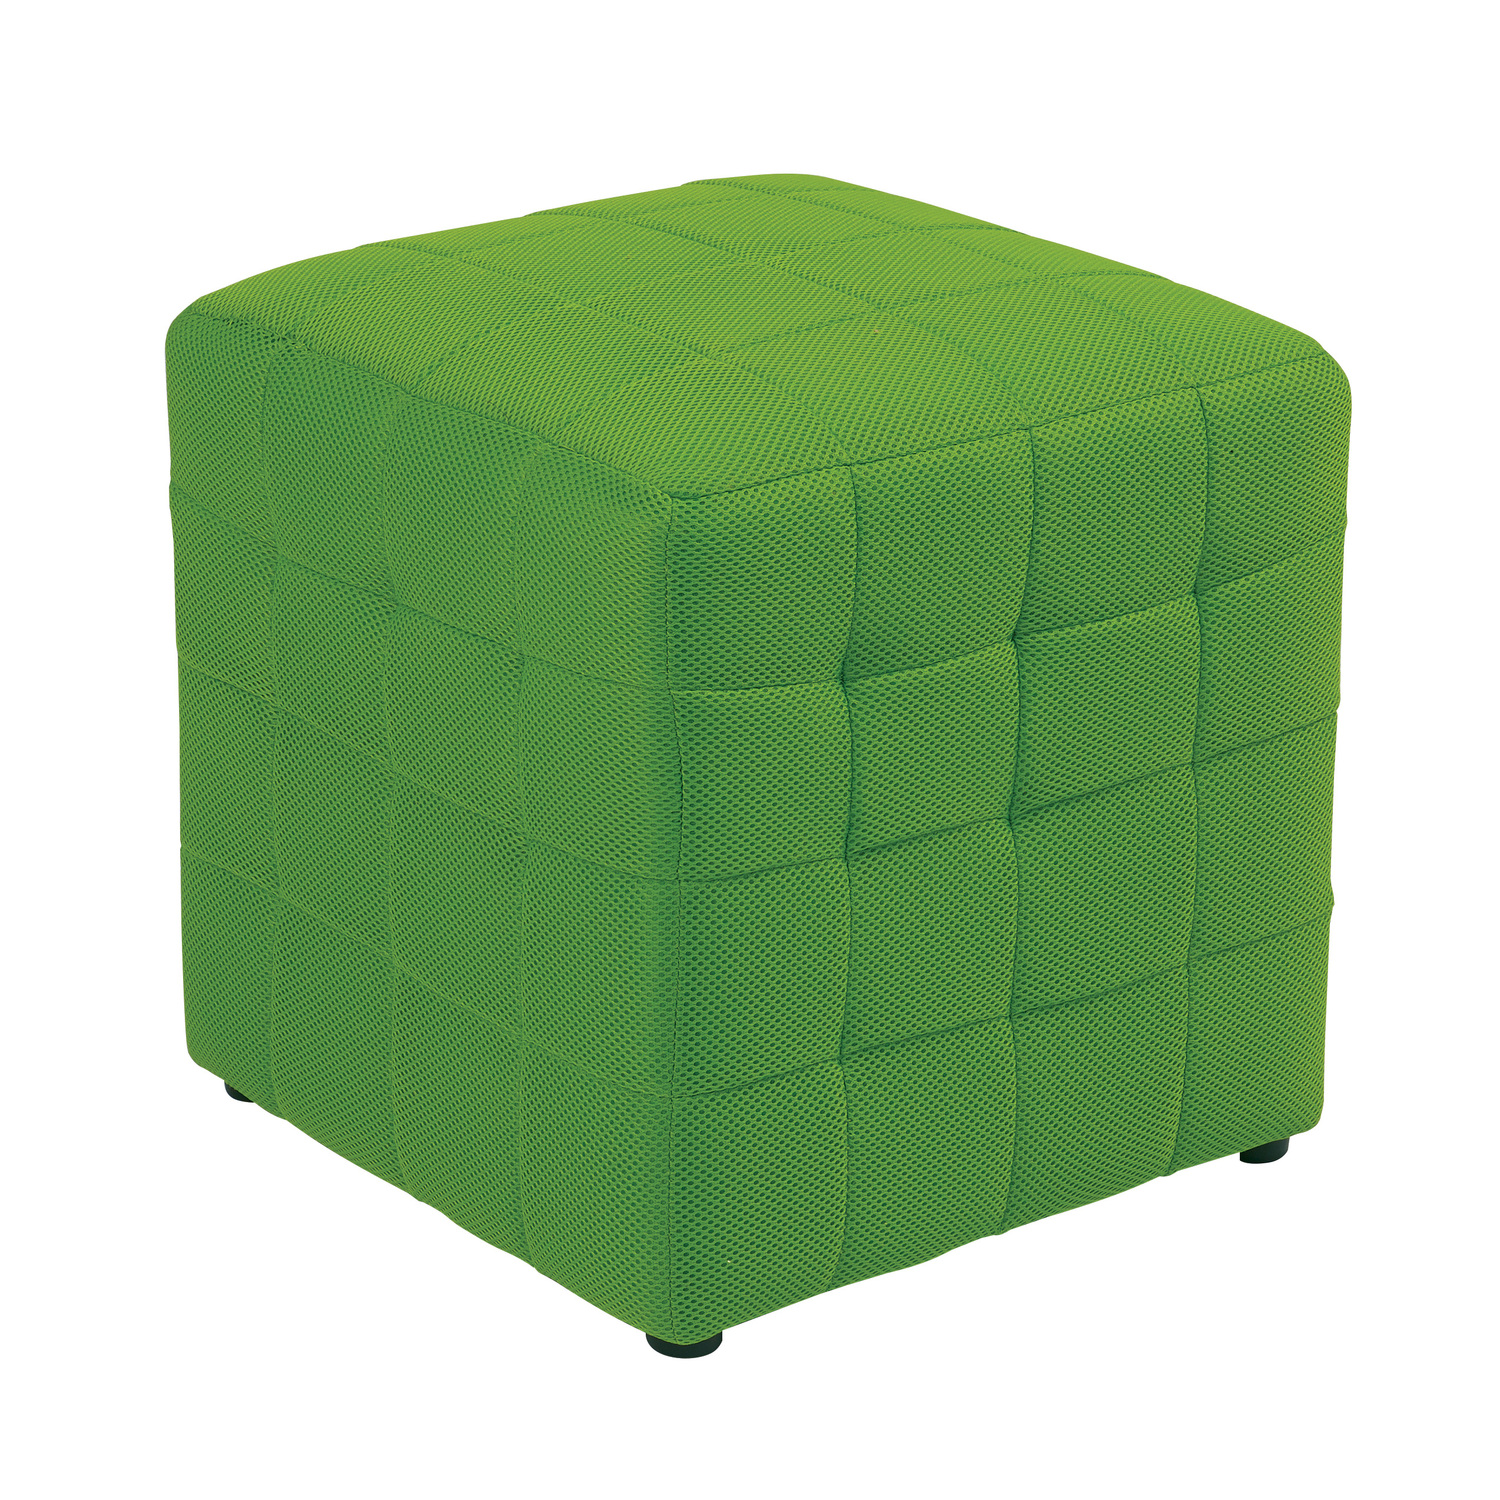 OSP Home Furnishings Detour 15" Green Fabric Cube - image 1 of 10